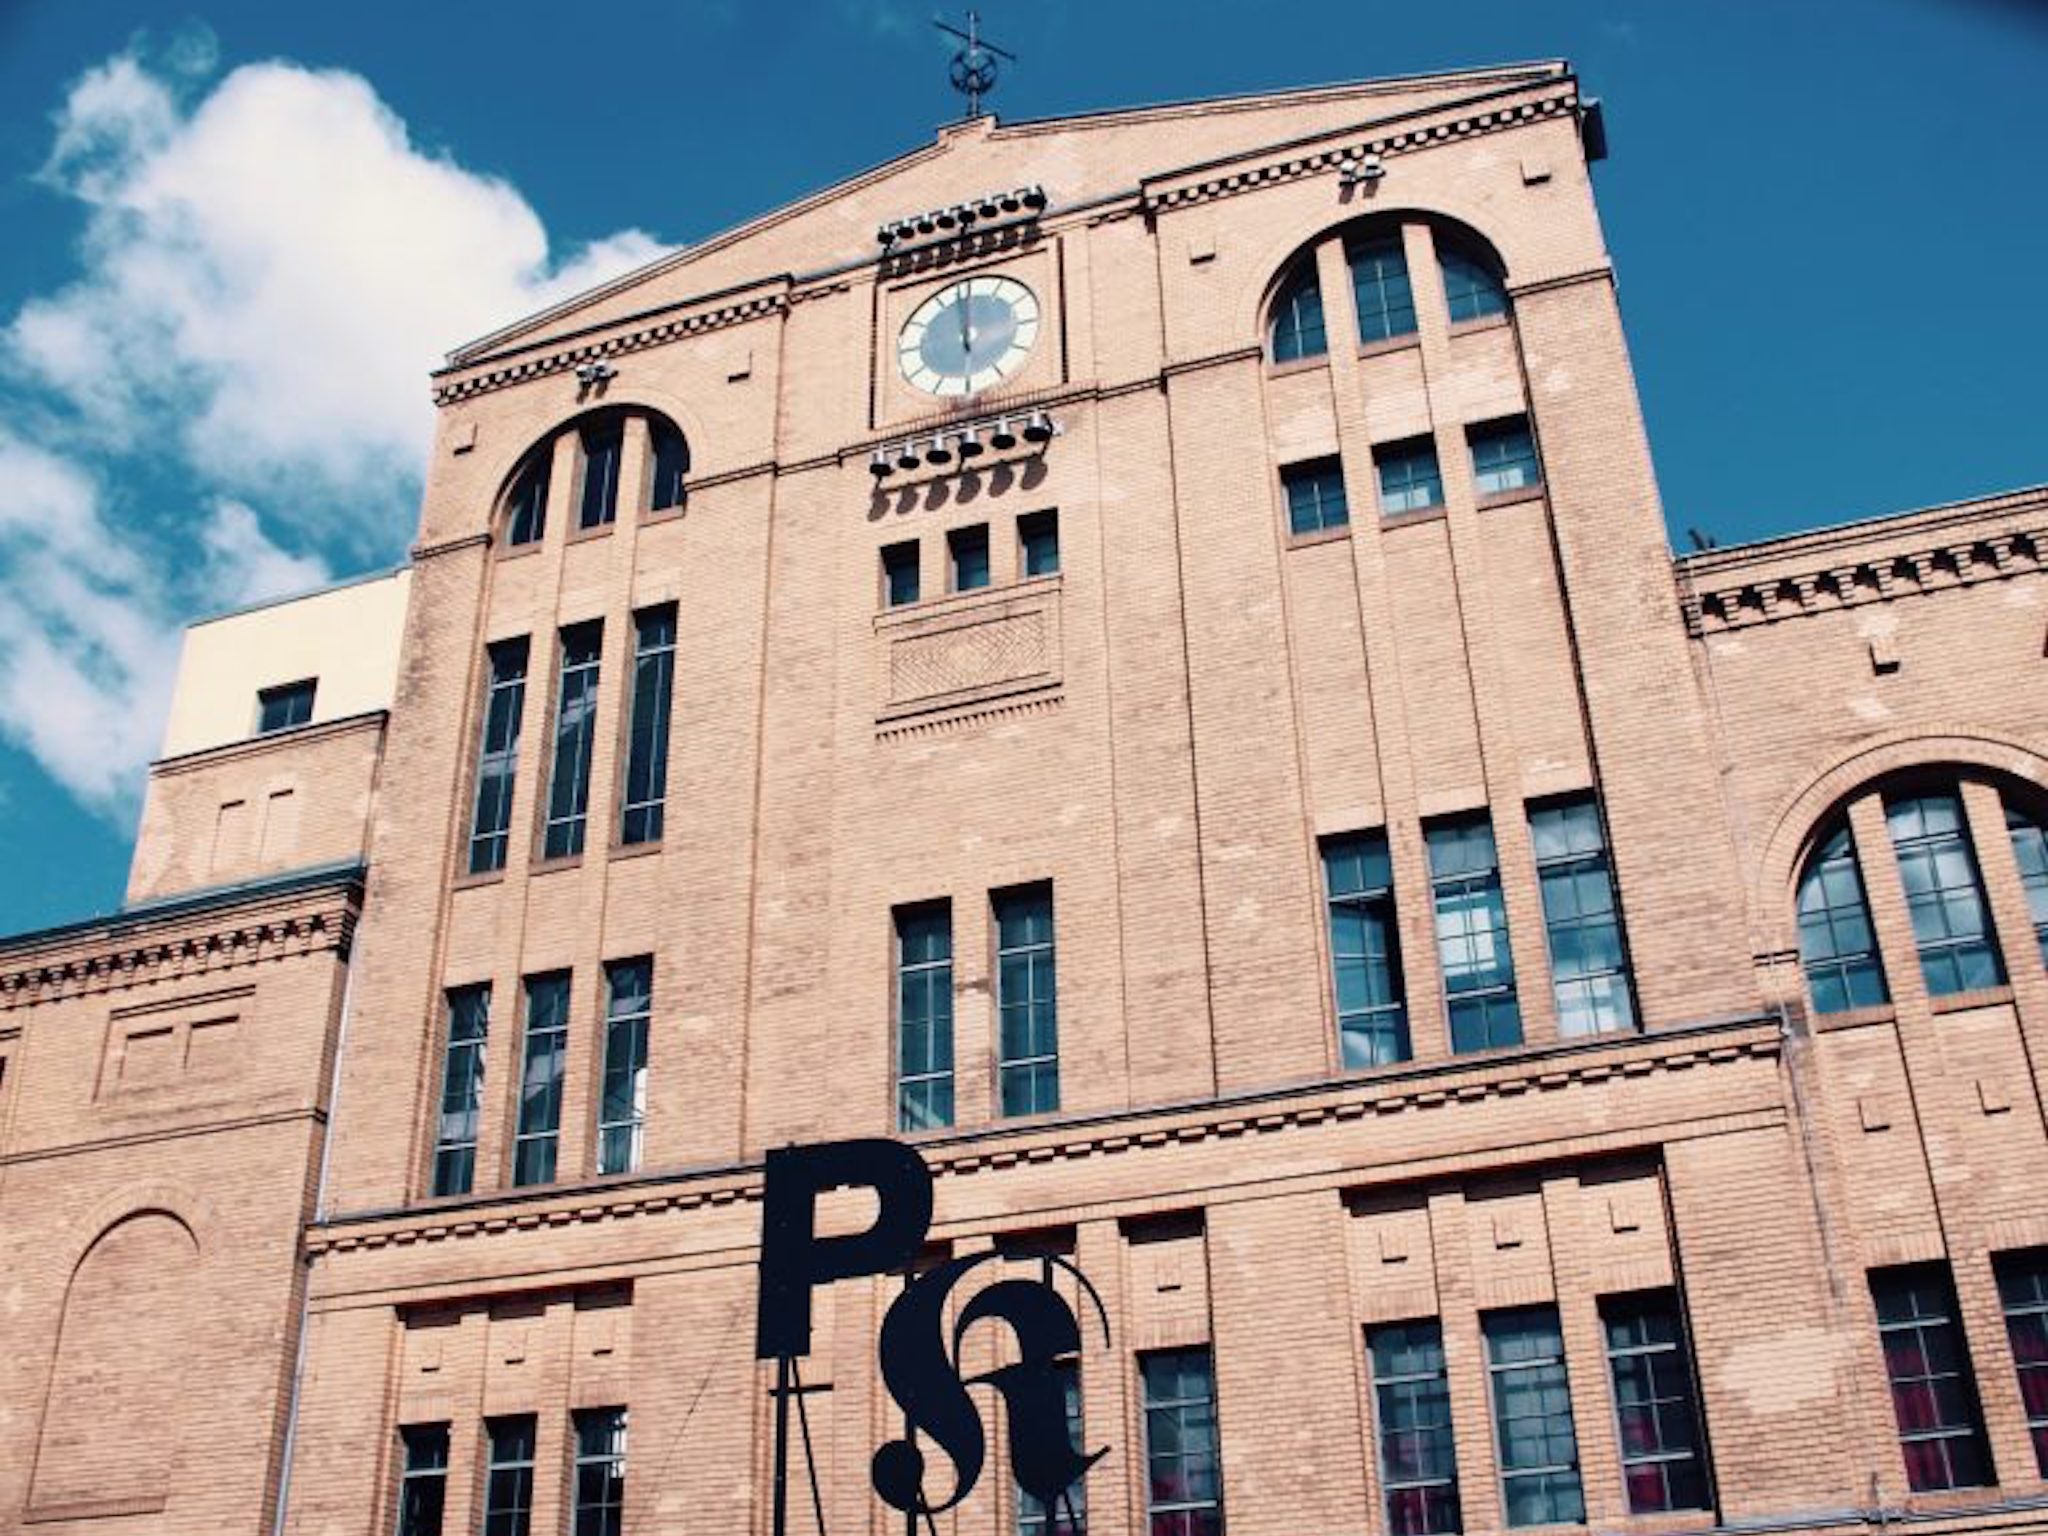 The third Pop-Kultur festival in Berlin took place in the Kulturbrauerei, a cultural centre in the grounds of an old brewery